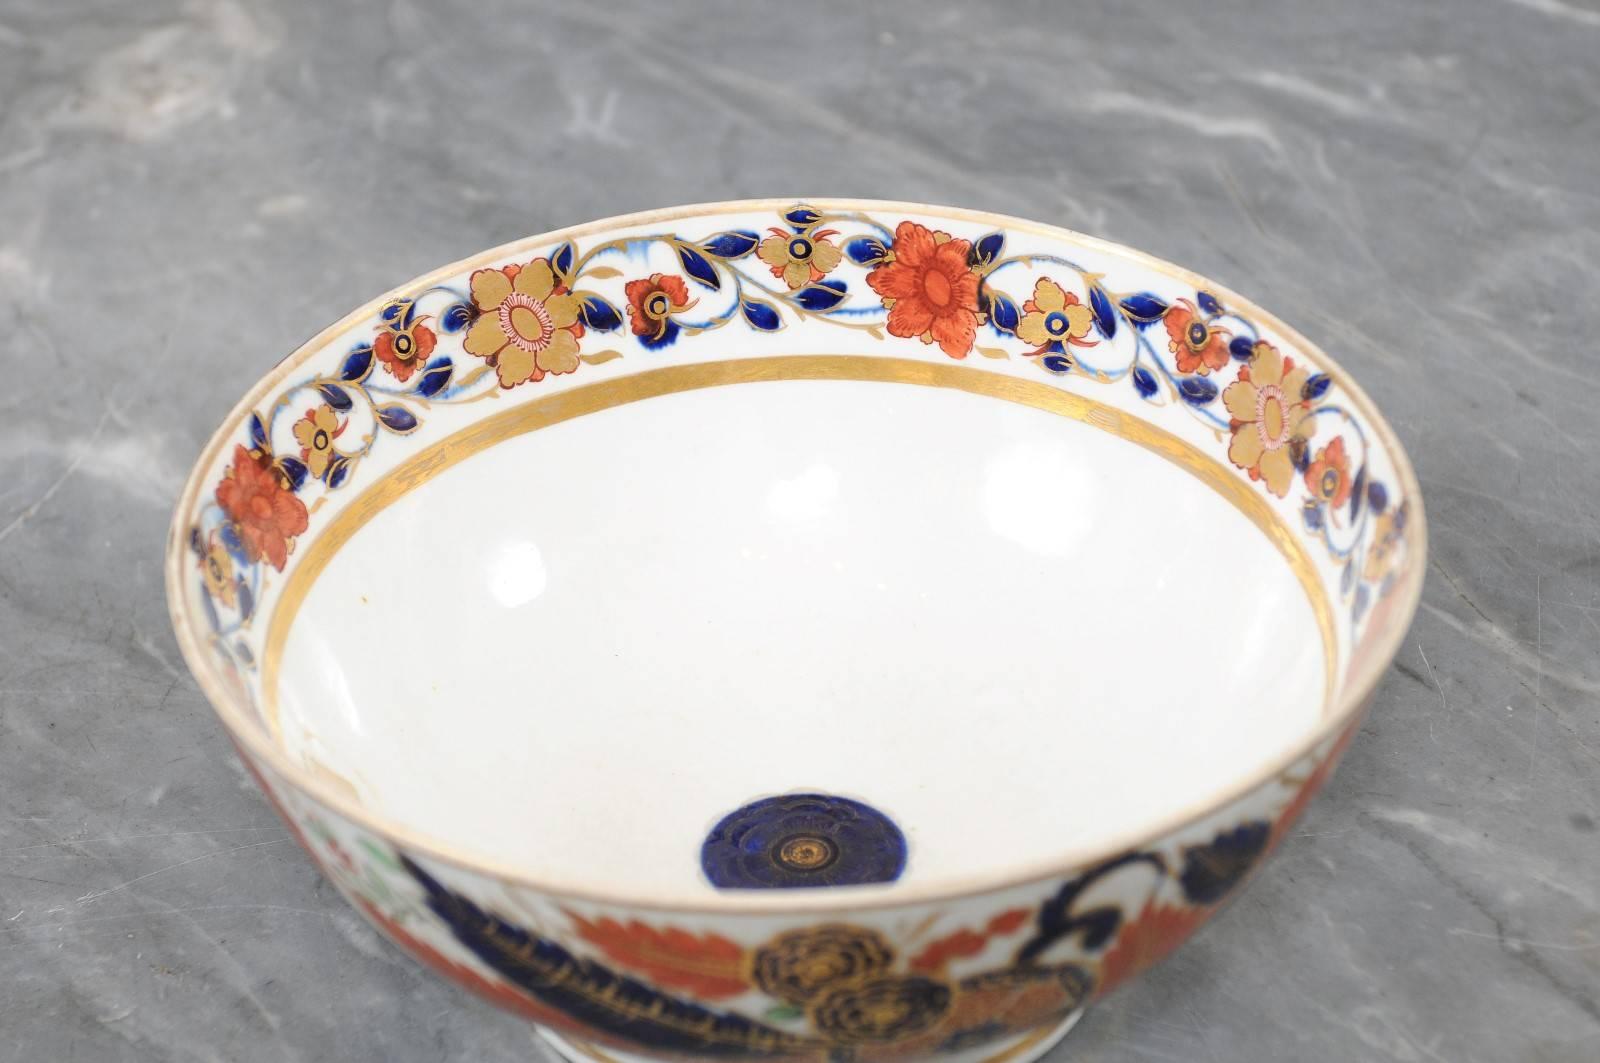 Spode “Tabacco Leaf” Punch Bowl after Chinese Export Design, England, ca. 1820 In Good Condition For Sale In Atlanta, GA